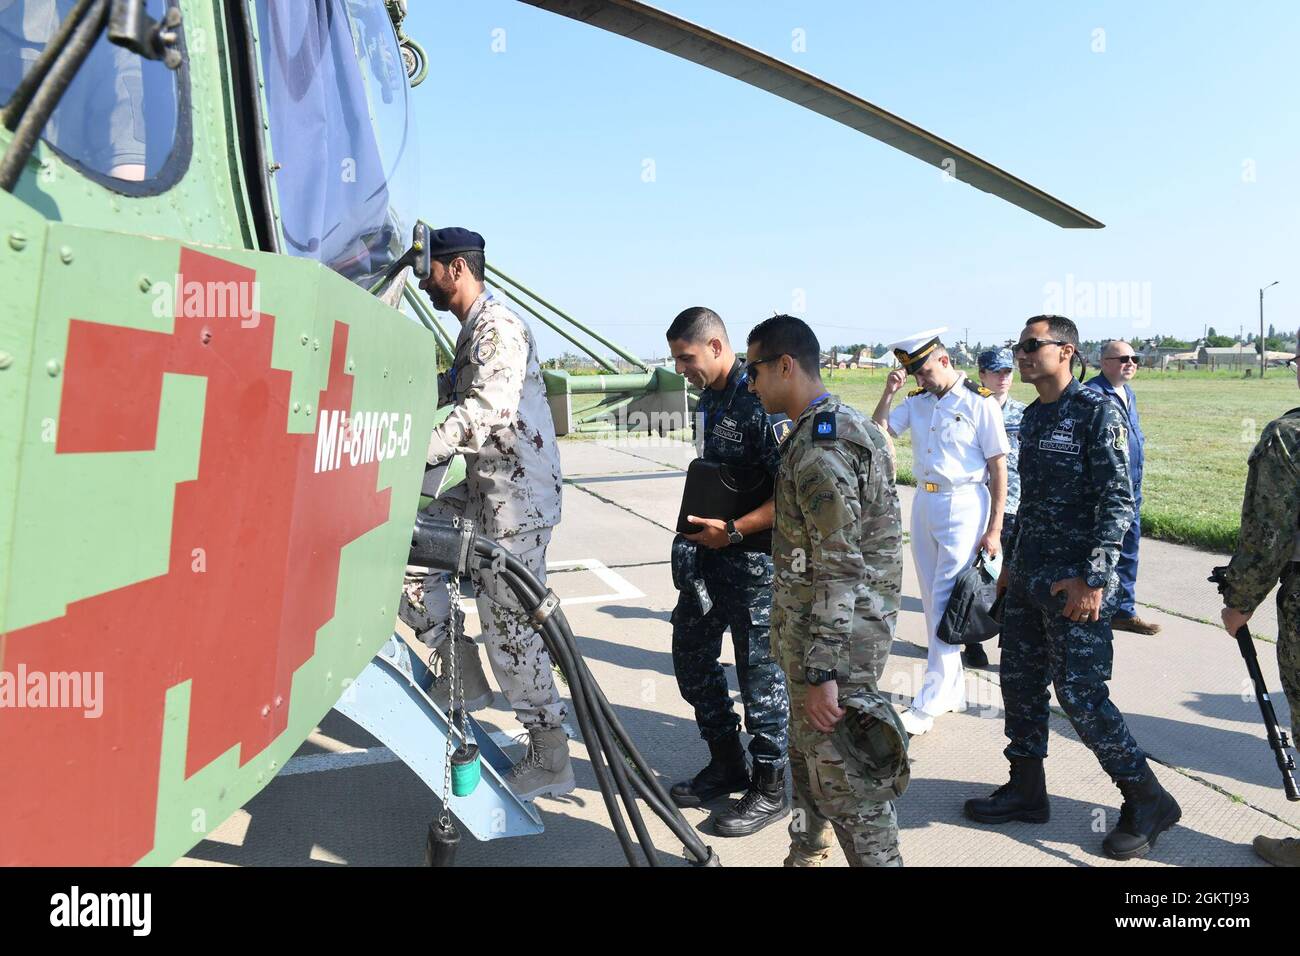 210630-N-VP310-0025  ODESA, Ukraine (June 30, 2021) Egyptian, United Arab Emirates, Canadian and Turkish military officers board a Ukrainian Mi-8 Helicopter to attend an air demonstration for Exercise Sea Breeze 2021 Odesa, Ukraine, June 30, 2021. Exercise Sea Breeze is a multinational maritime exercise cohosted by the U.S. Sixth Fleet and the Ukrainian Navy since 1997. Sea Breeze 2021 is designed to enhance interoperability of participating nations and strengthens maritime security and peace in the region. Stock Photo